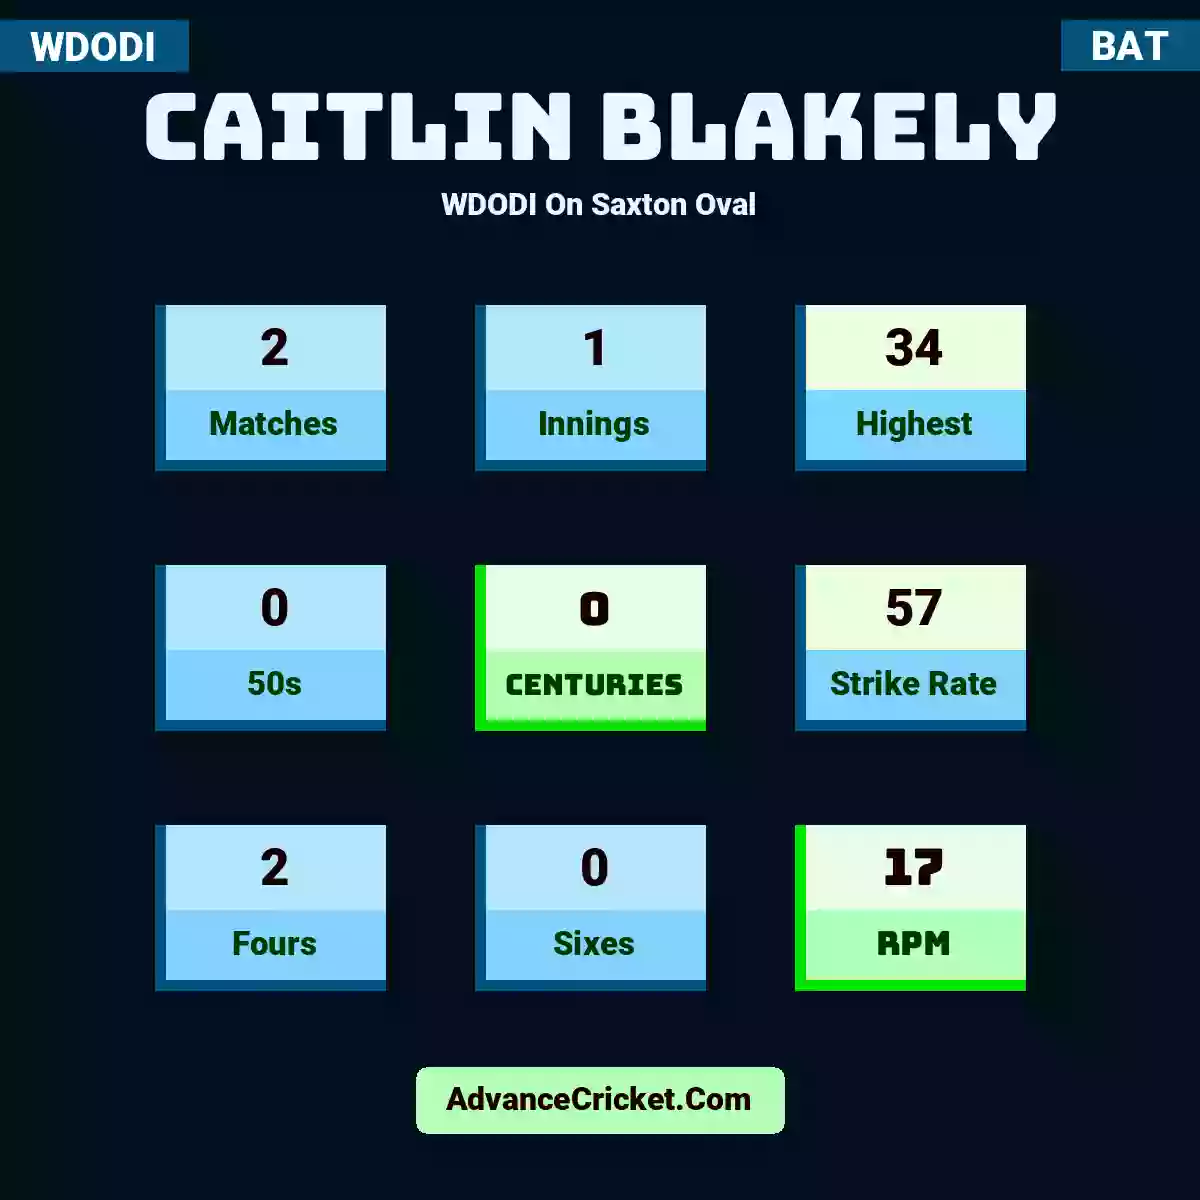 Caitlin Blakely WDODI  On Saxton Oval, Caitlin Blakely played 2 matches, scored 34 runs as highest, 0 half-centuries, and 0 centuries, with a strike rate of 57. C.Blakely hit 2 fours and 0 sixes, with an RPM of 17.